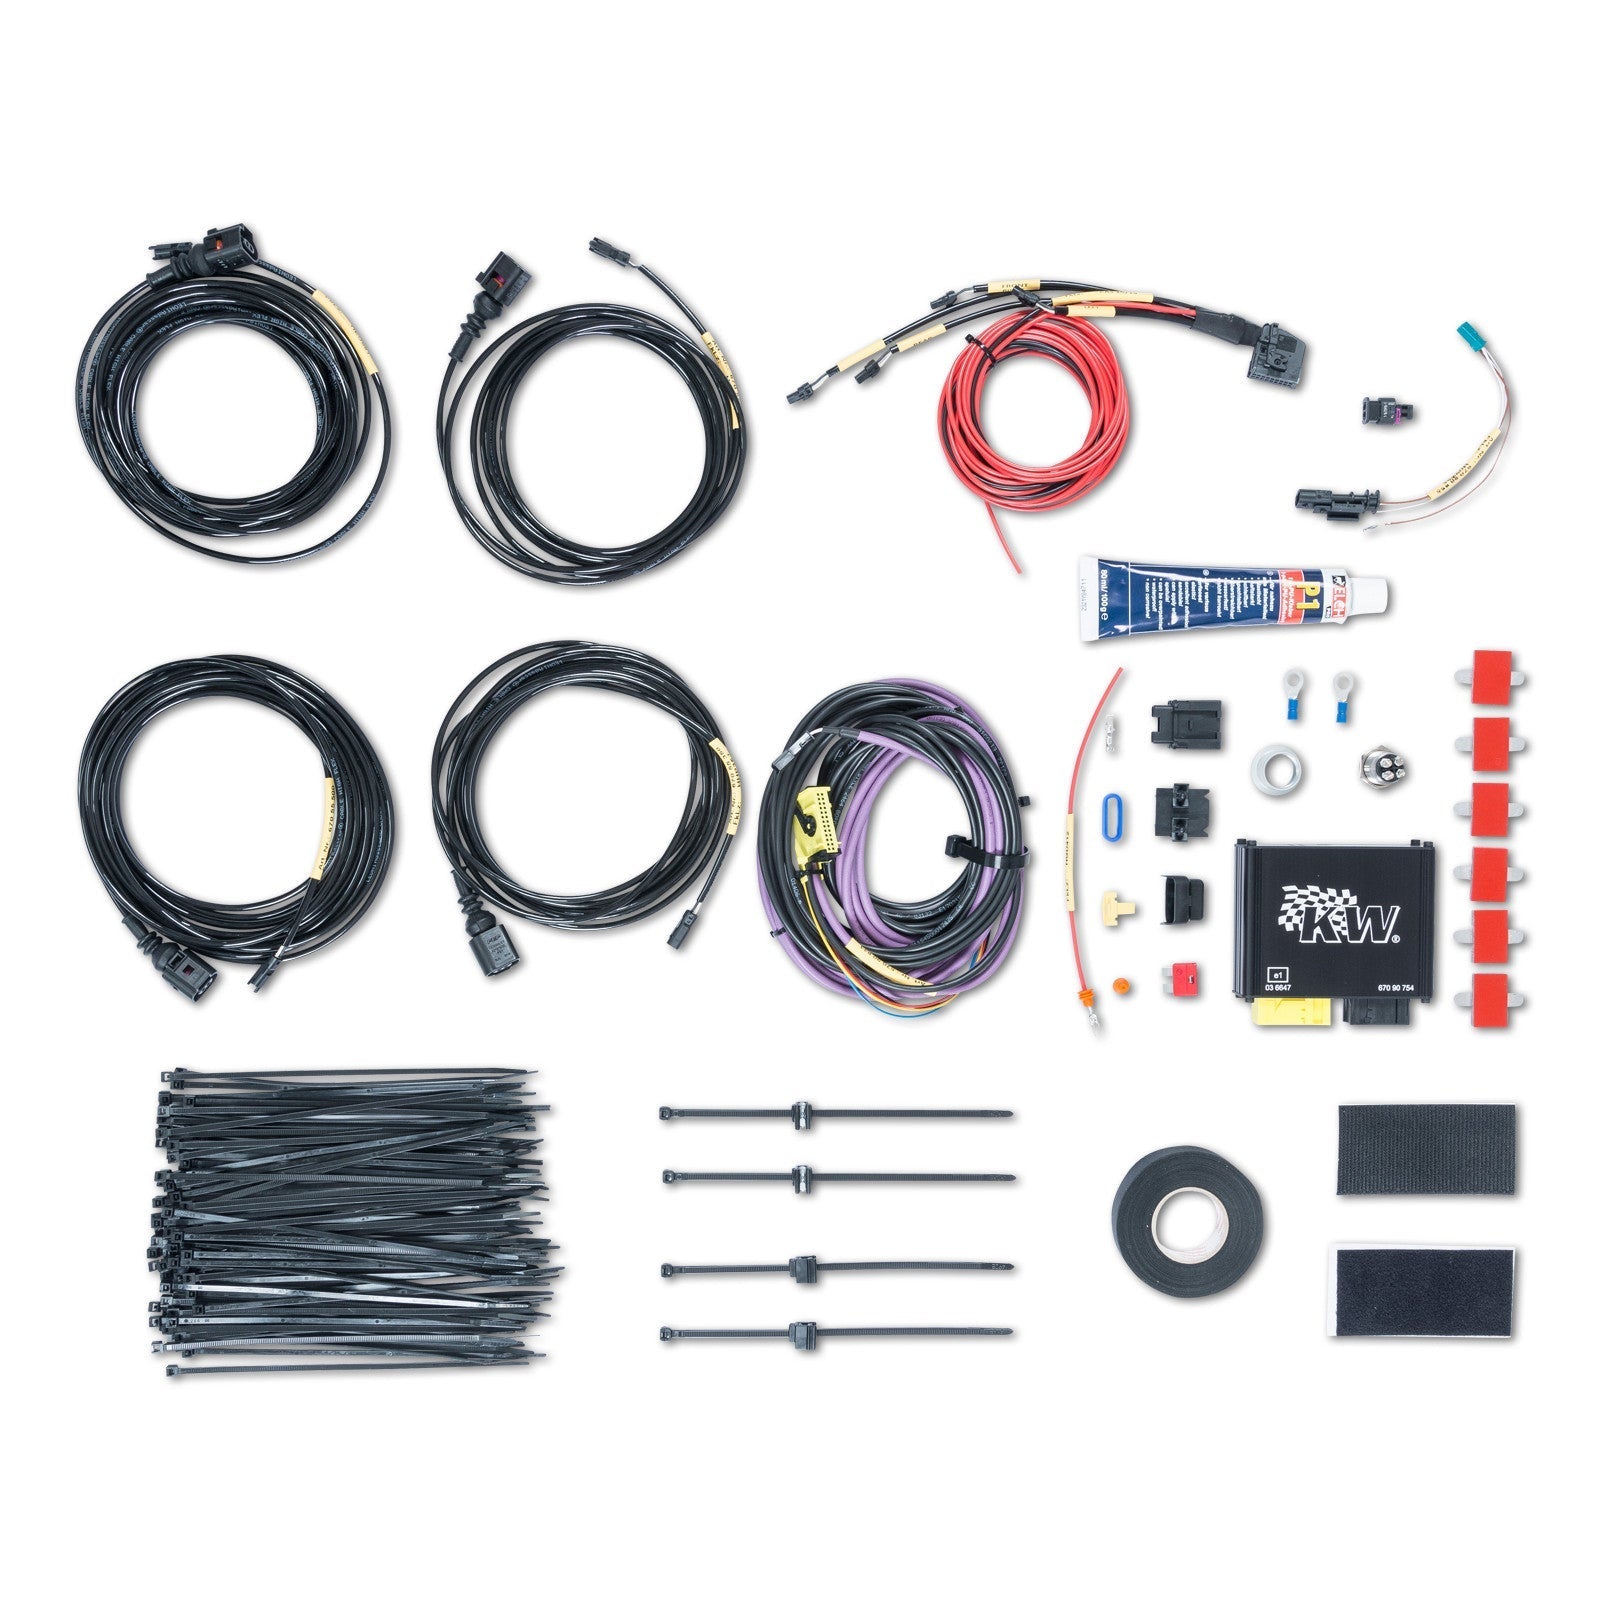 KW DCC ECU Coilover Kit - MK6 Golf, TDI, GTI without DCC